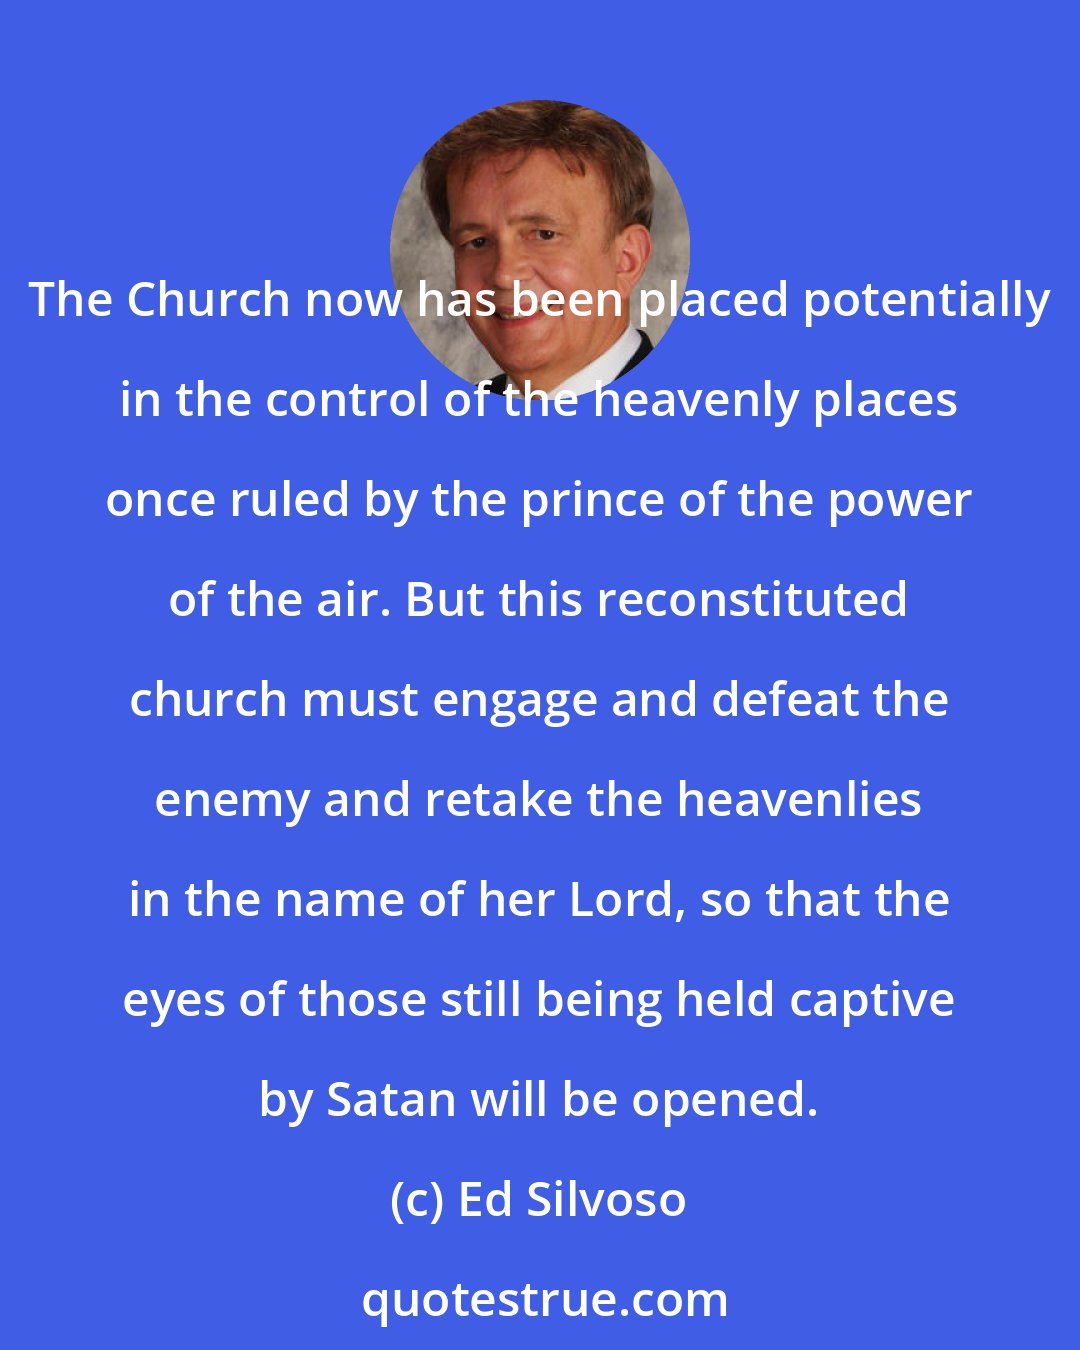 Ed Silvoso: The Church now has been placed potentially in the control of the heavenly places once ruled by the prince of the power of the air. But this reconstituted church must engage and defeat the enemy and retake the heavenlies in the name of her Lord, so that the eyes of those still being held captive by Satan will be opened.